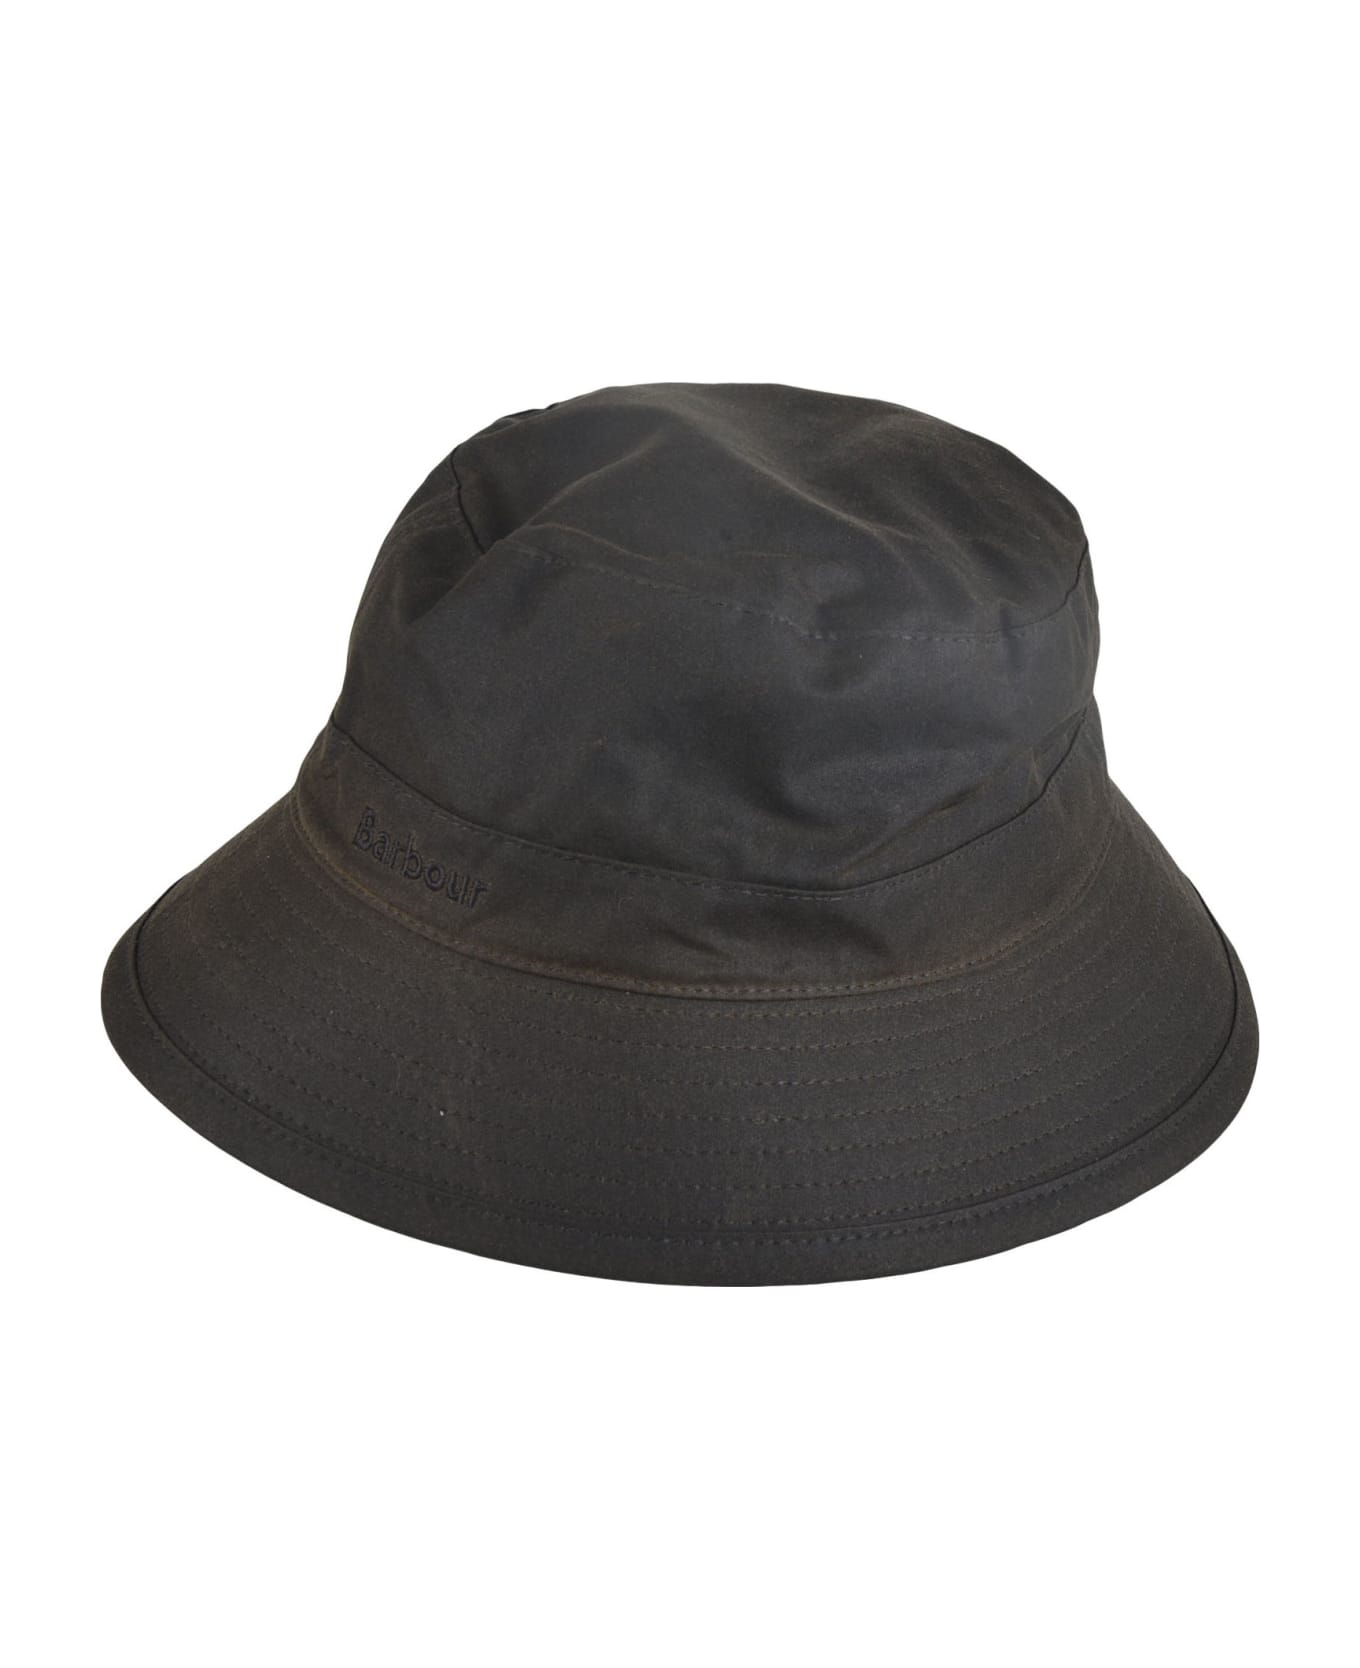 Barbour Wax Sports Hat - Olive